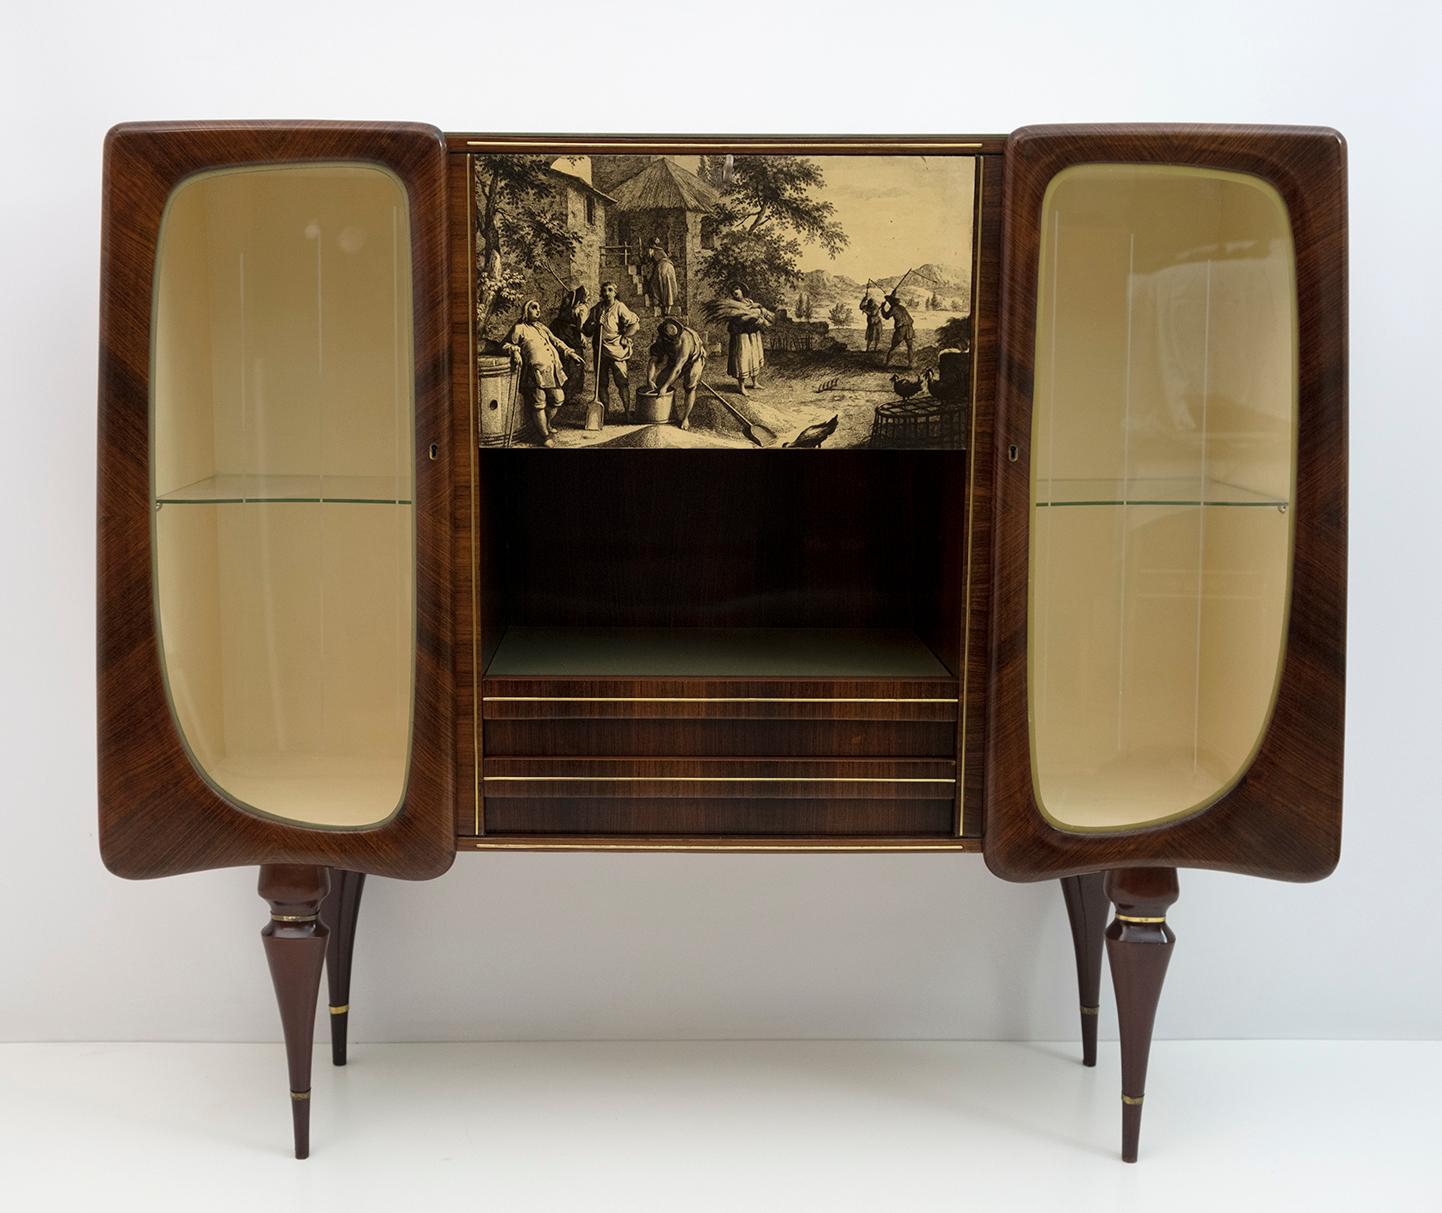 Modern Italian mid-century display cabinet or bar characterized by two splendid wooden doors protruding from the structure, the central part consists of a flap, on which an eighteenth-century style image is printed, a compartment with a ivory glass